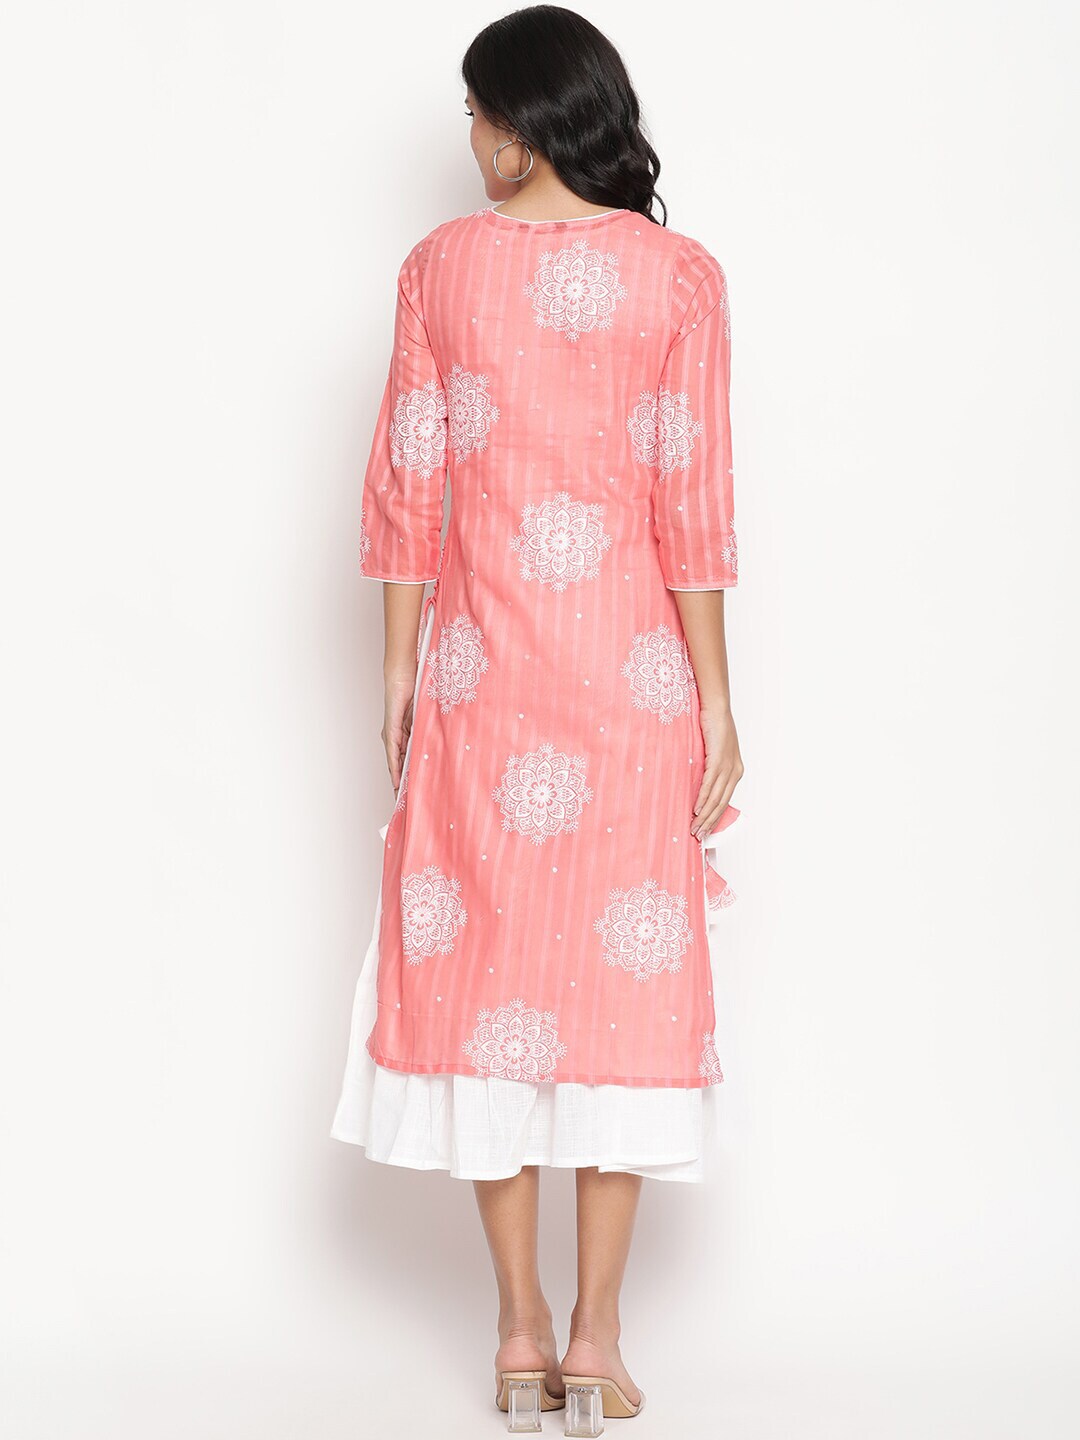 Women Pink White Printed Double Layer Dress